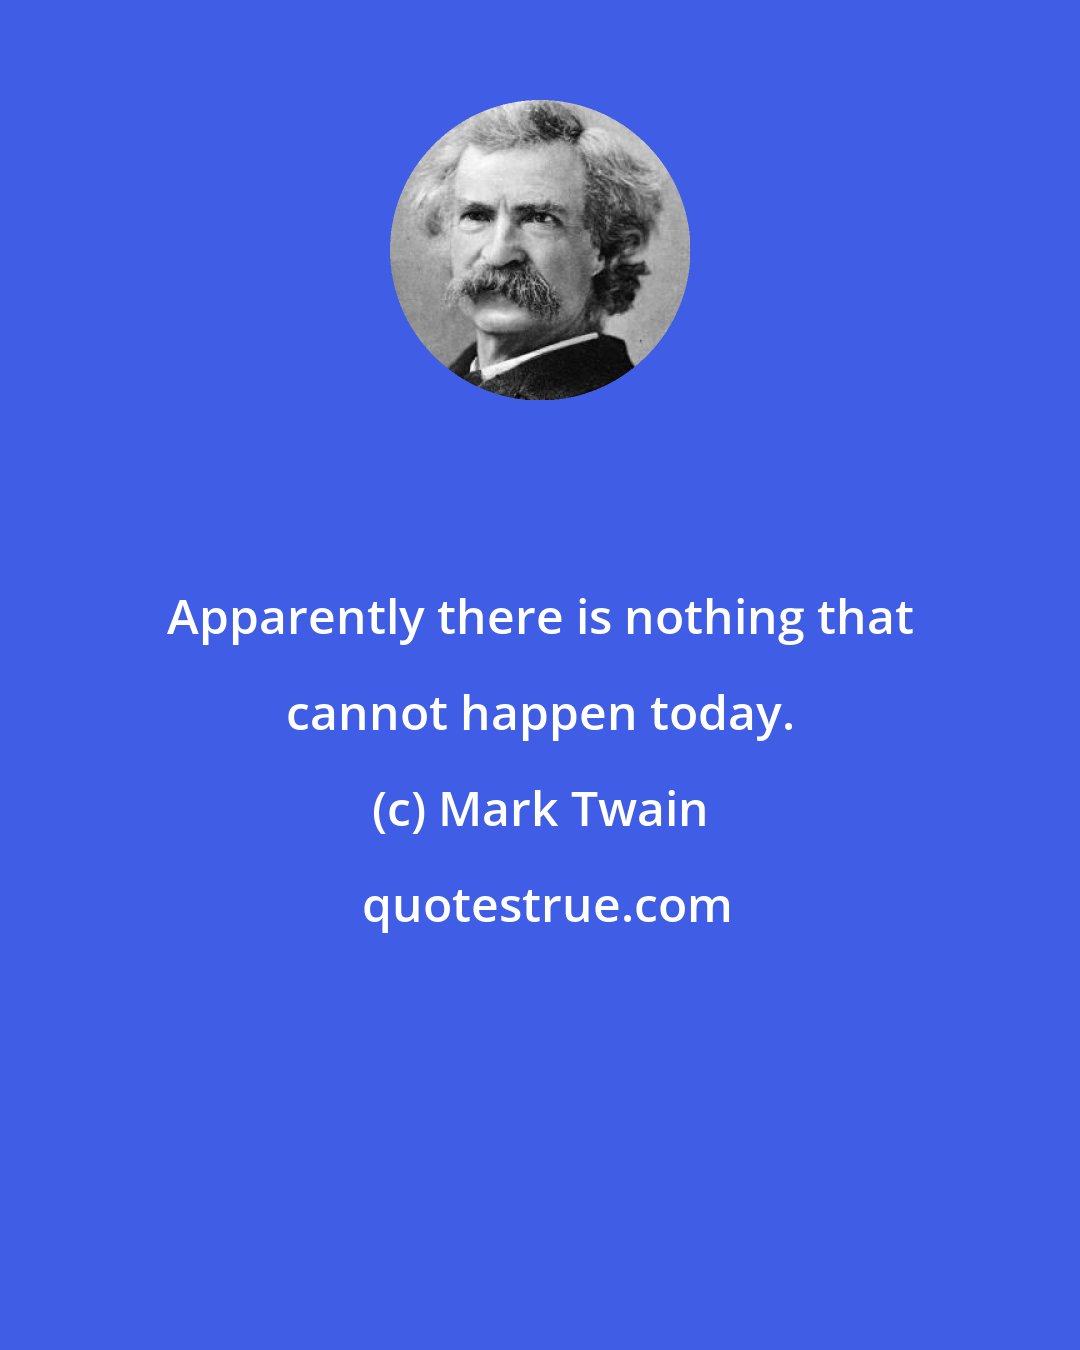 Mark Twain: Apparently there is nothing that cannot happen today.